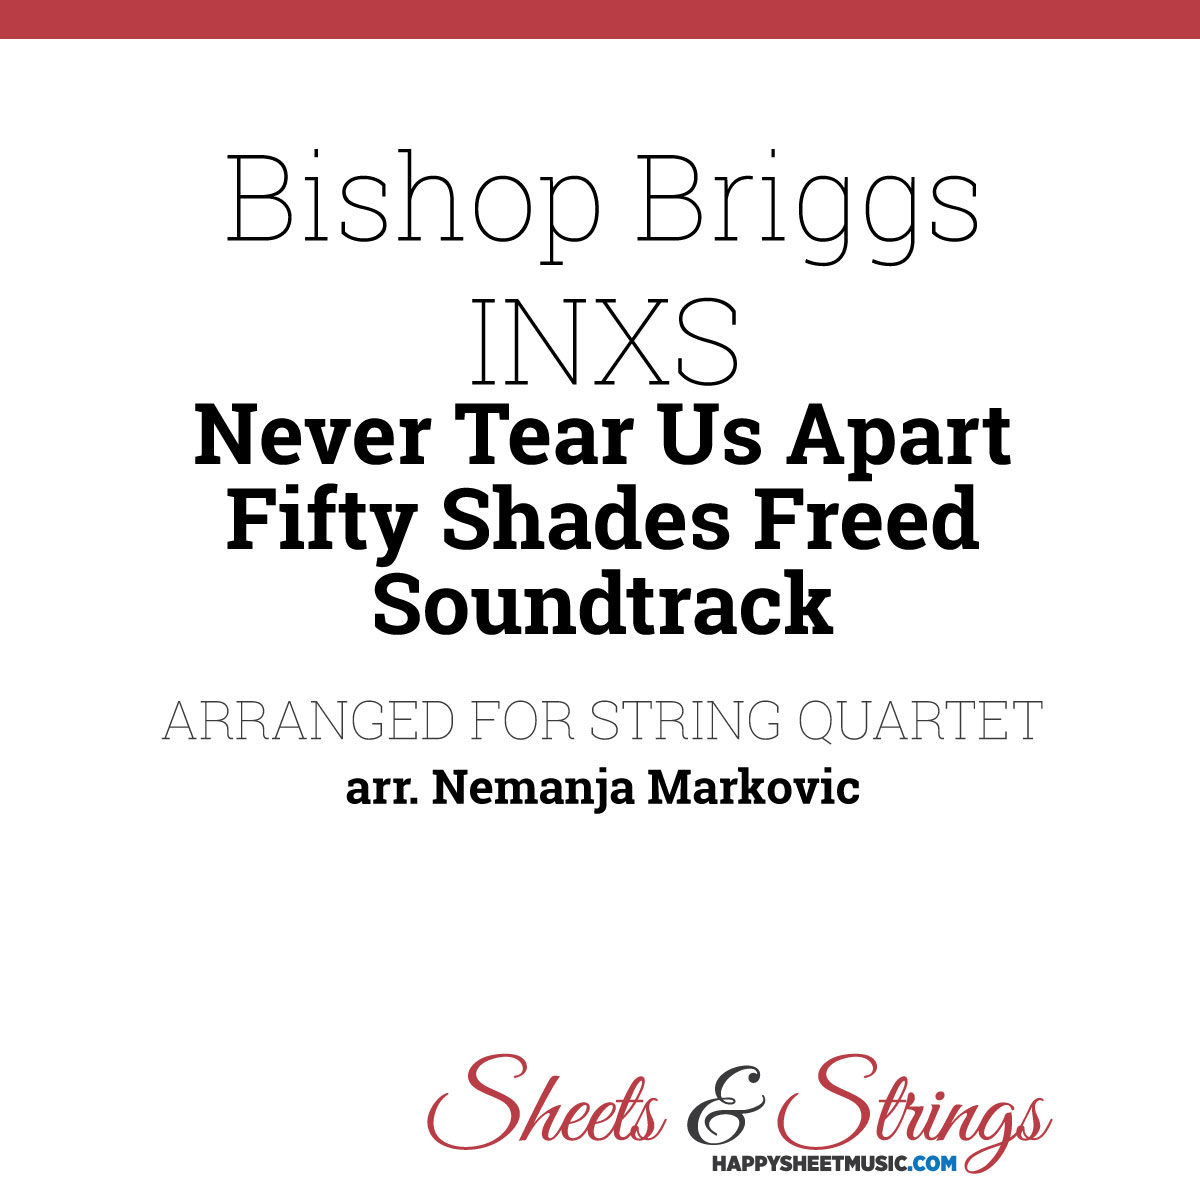 Bishop Briggs INXS Never Tear Us Apart Fifty Shades Freed Soundtrack Sheet Music for String Quartet